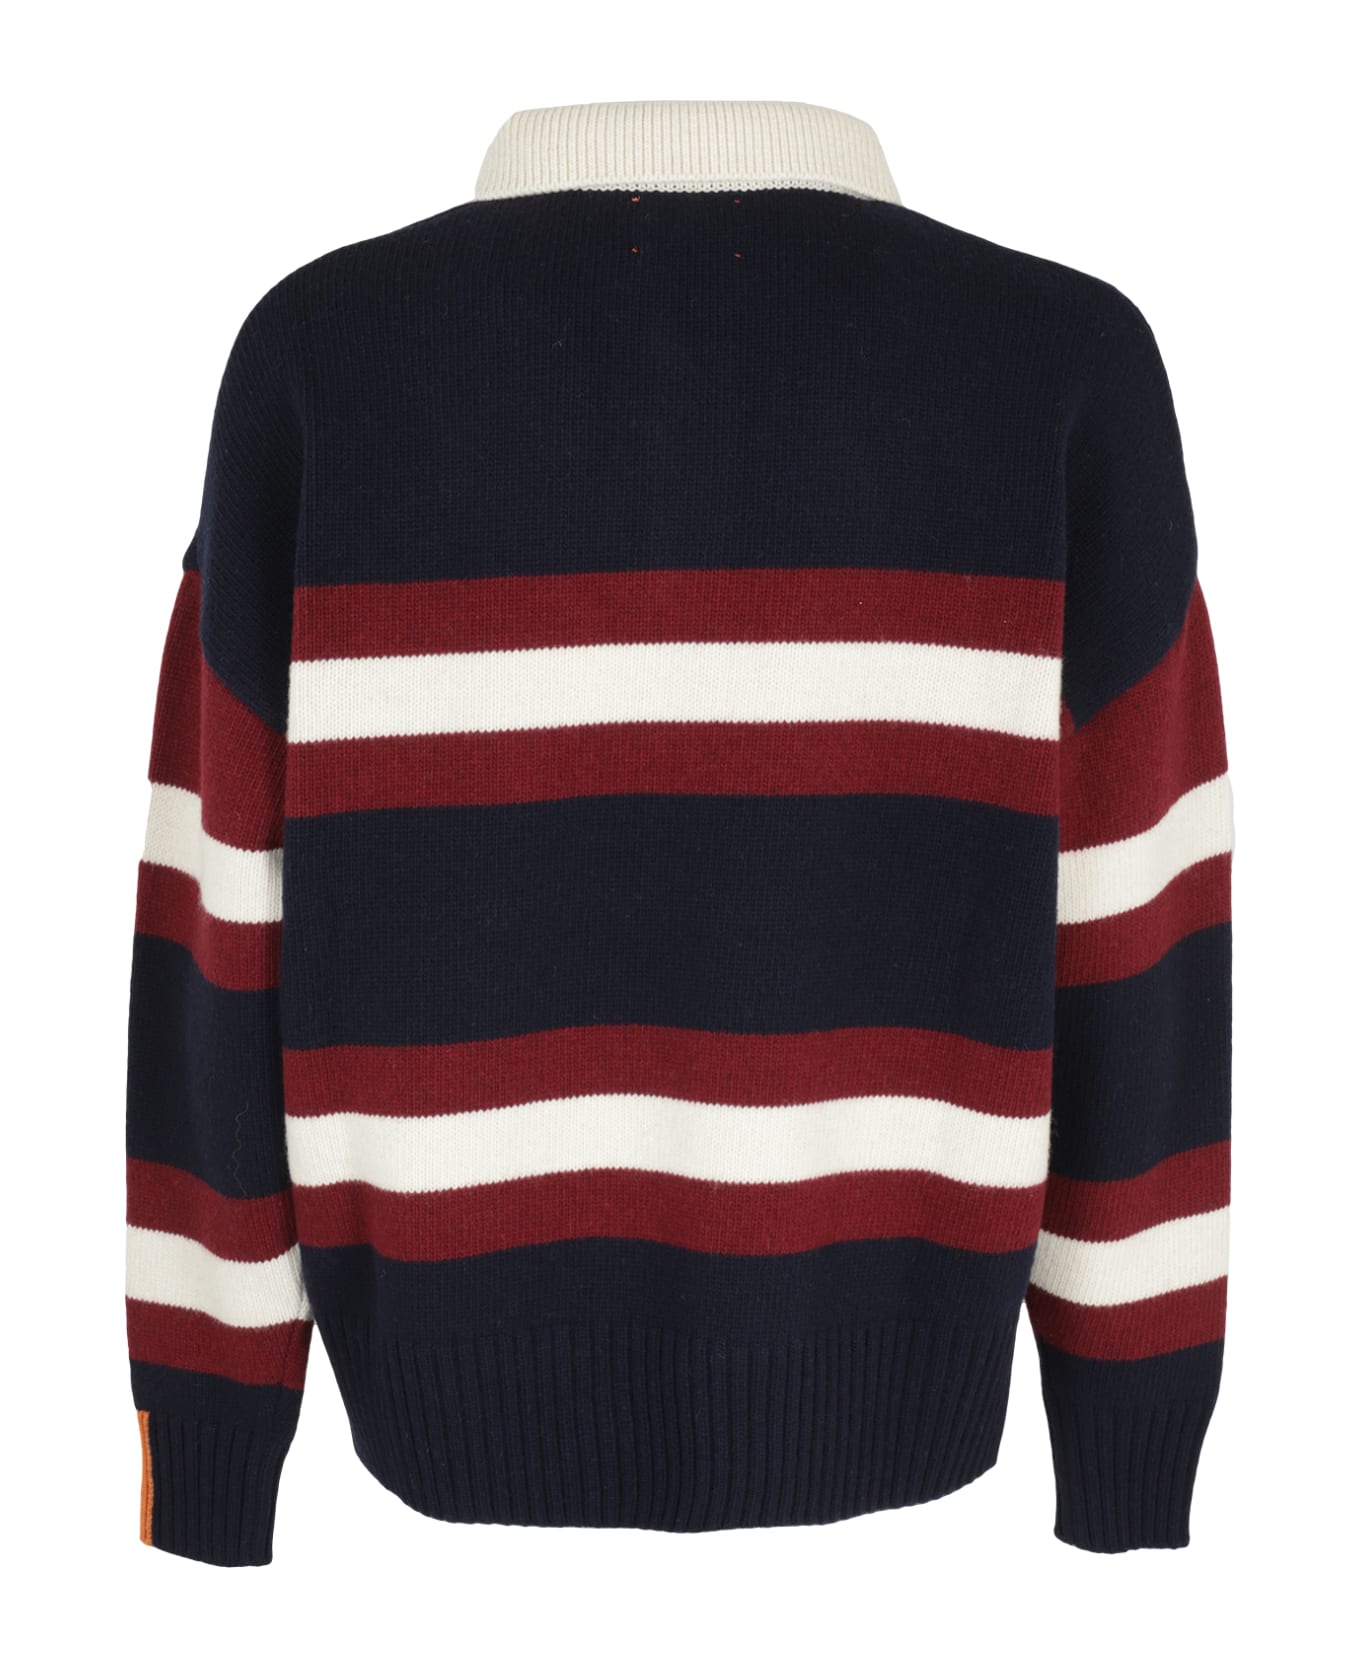 Right For Polo Righe - Navy Bordeaux